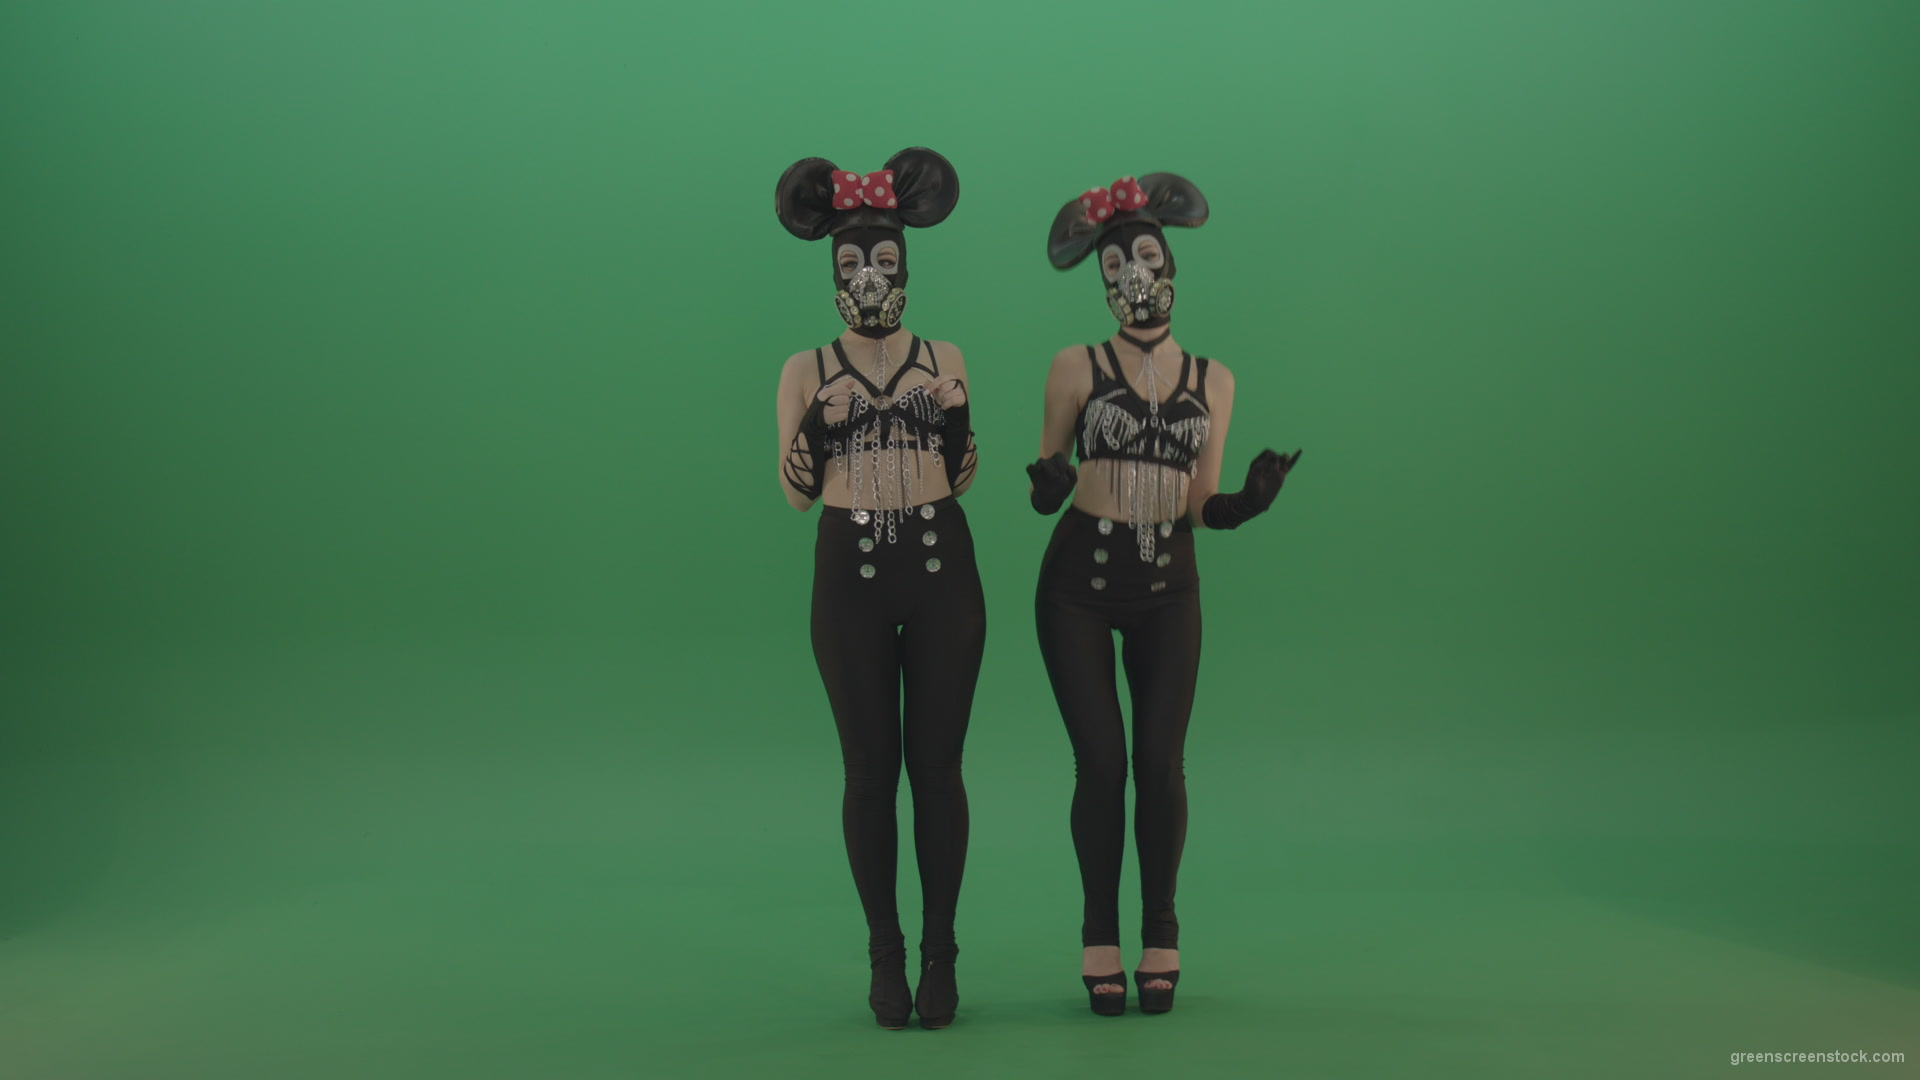 Two-girls-dressed-in-Mickey-Mouse-sit-squarelyon-green-screen_002 Green Screen Stock